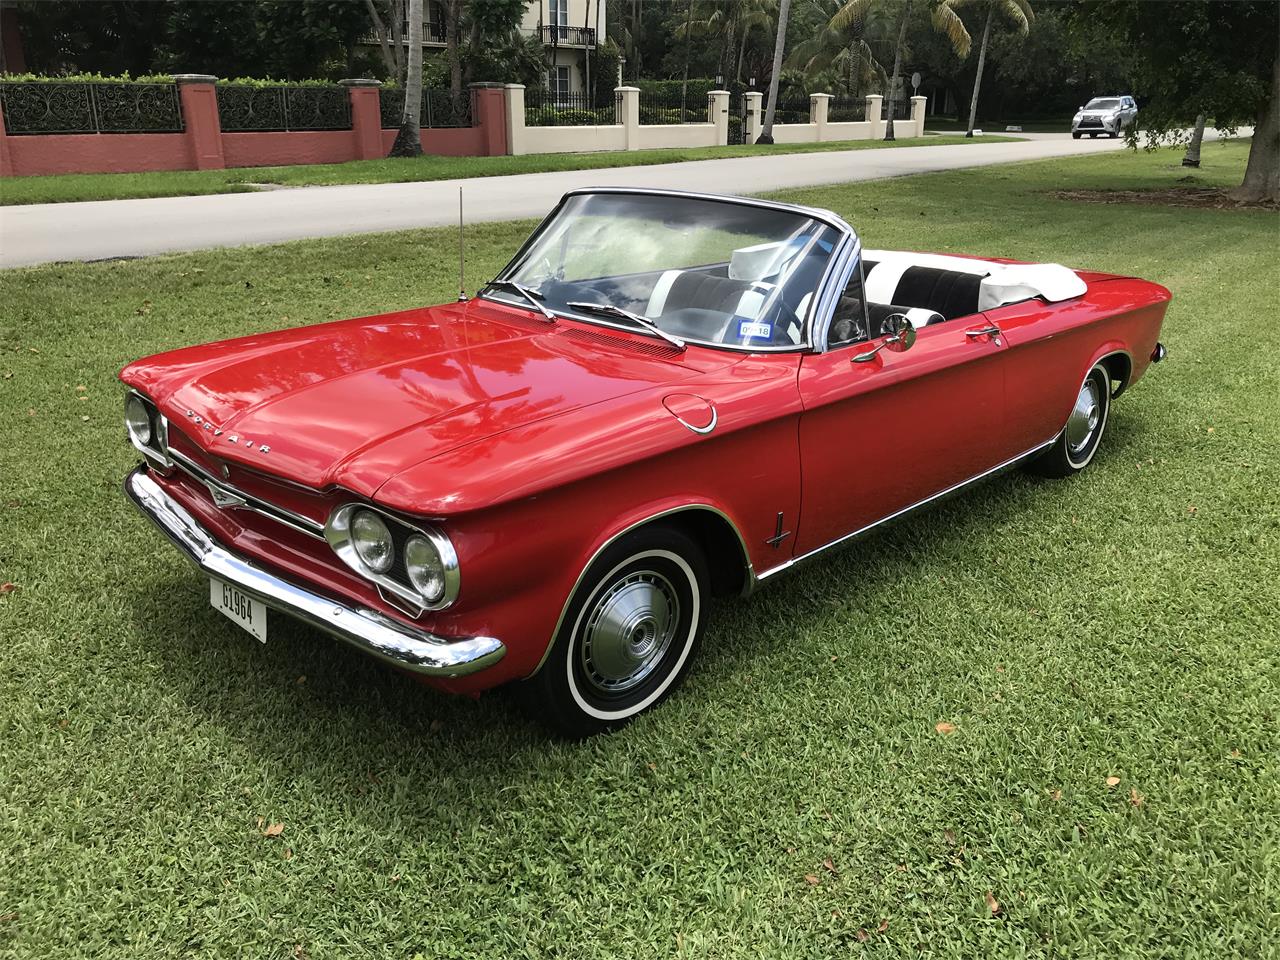 For Sale: 1964 Chevrolet Corvair Monza in Coral Gables , Florida.